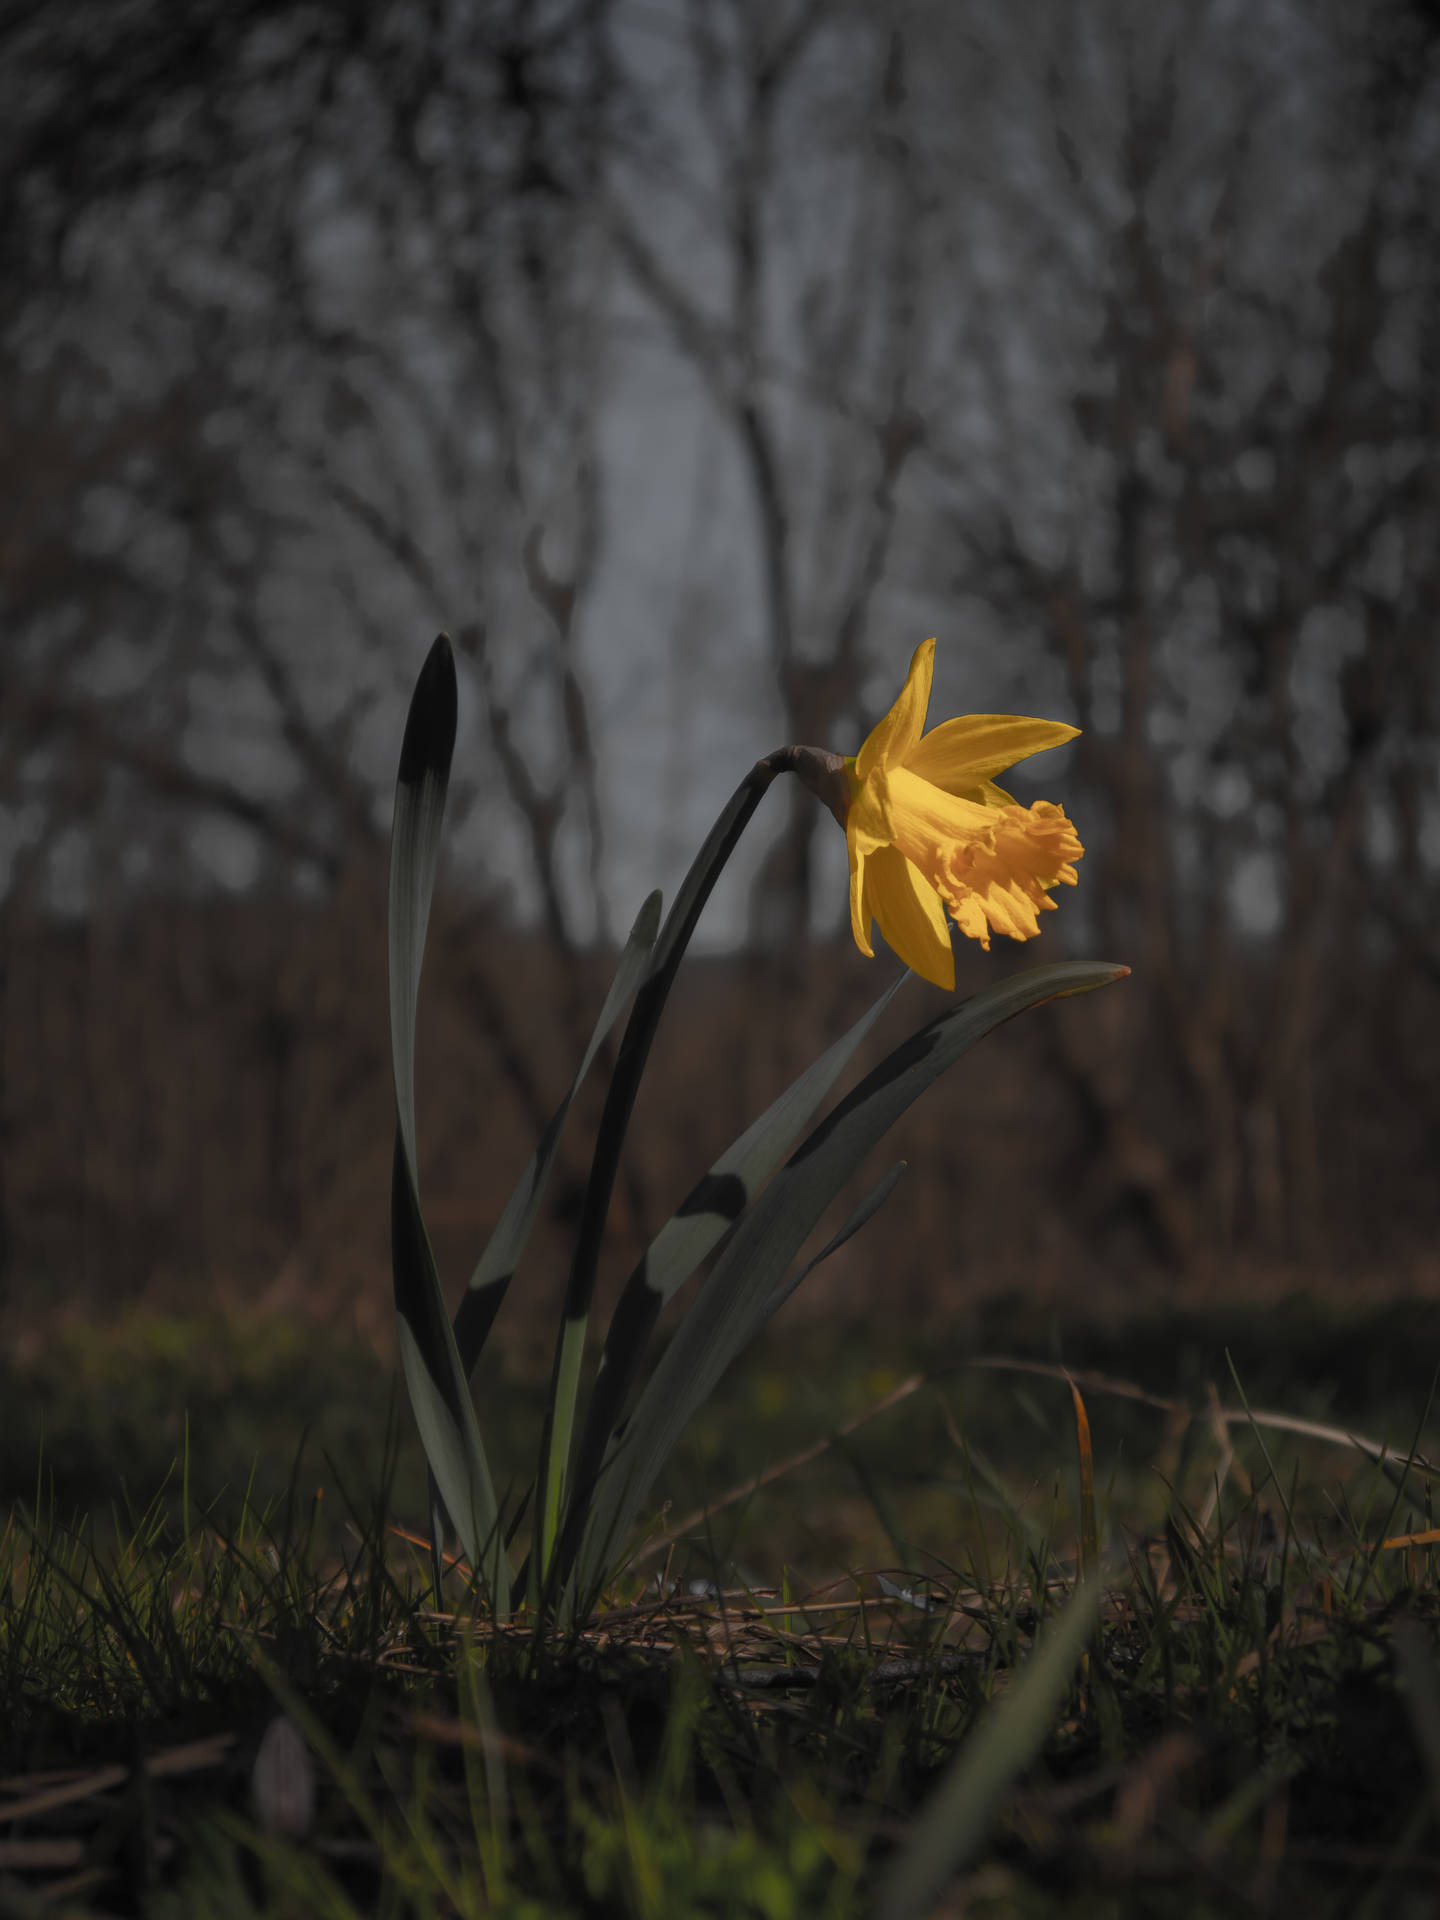 Blooming Yellow Daffodil Flower At Dusk